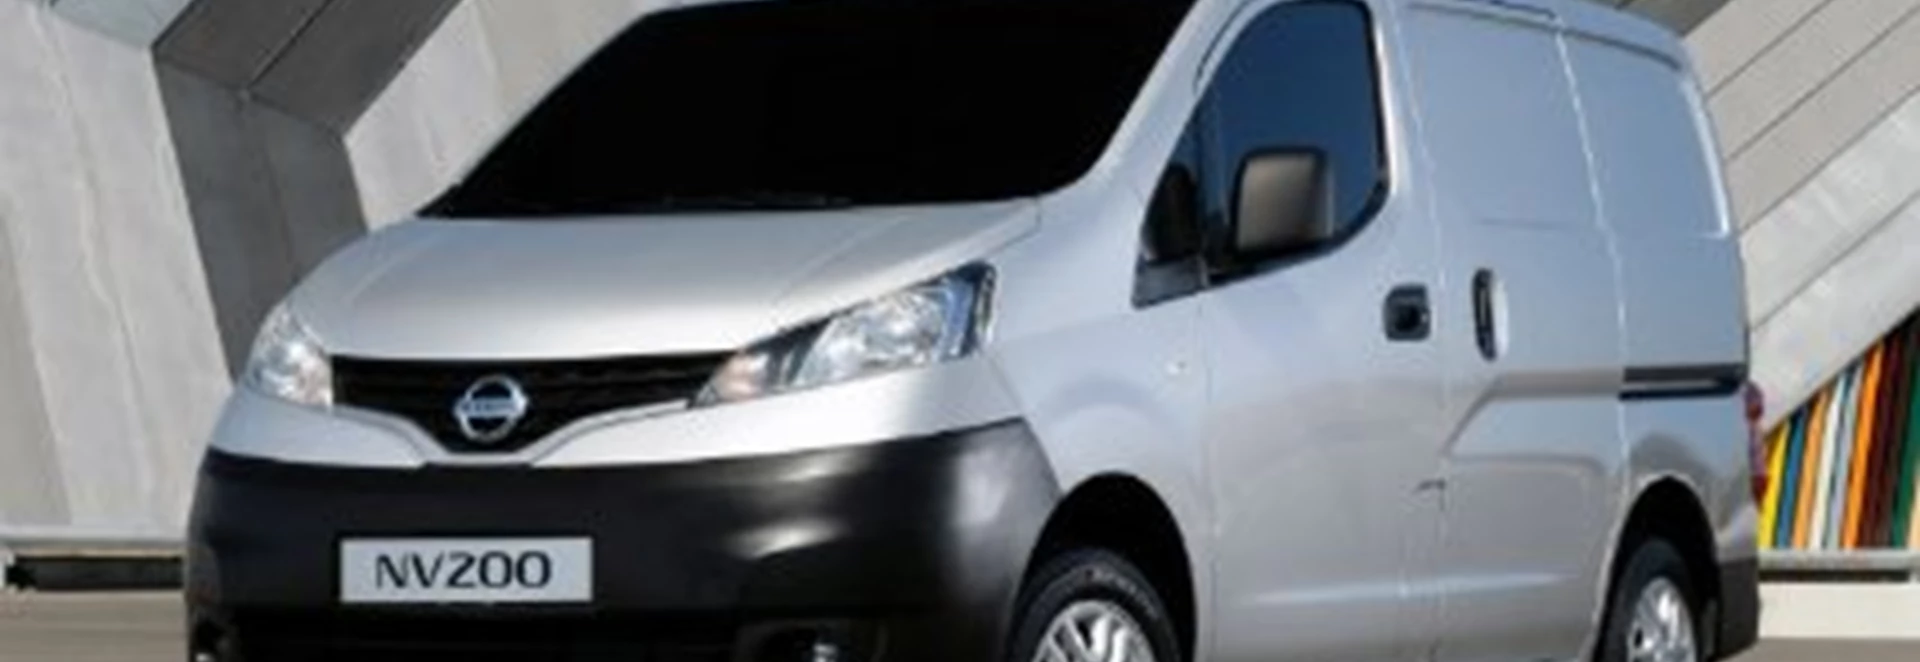 Nissan NV200 SE 1.5 dCi manual first drive 